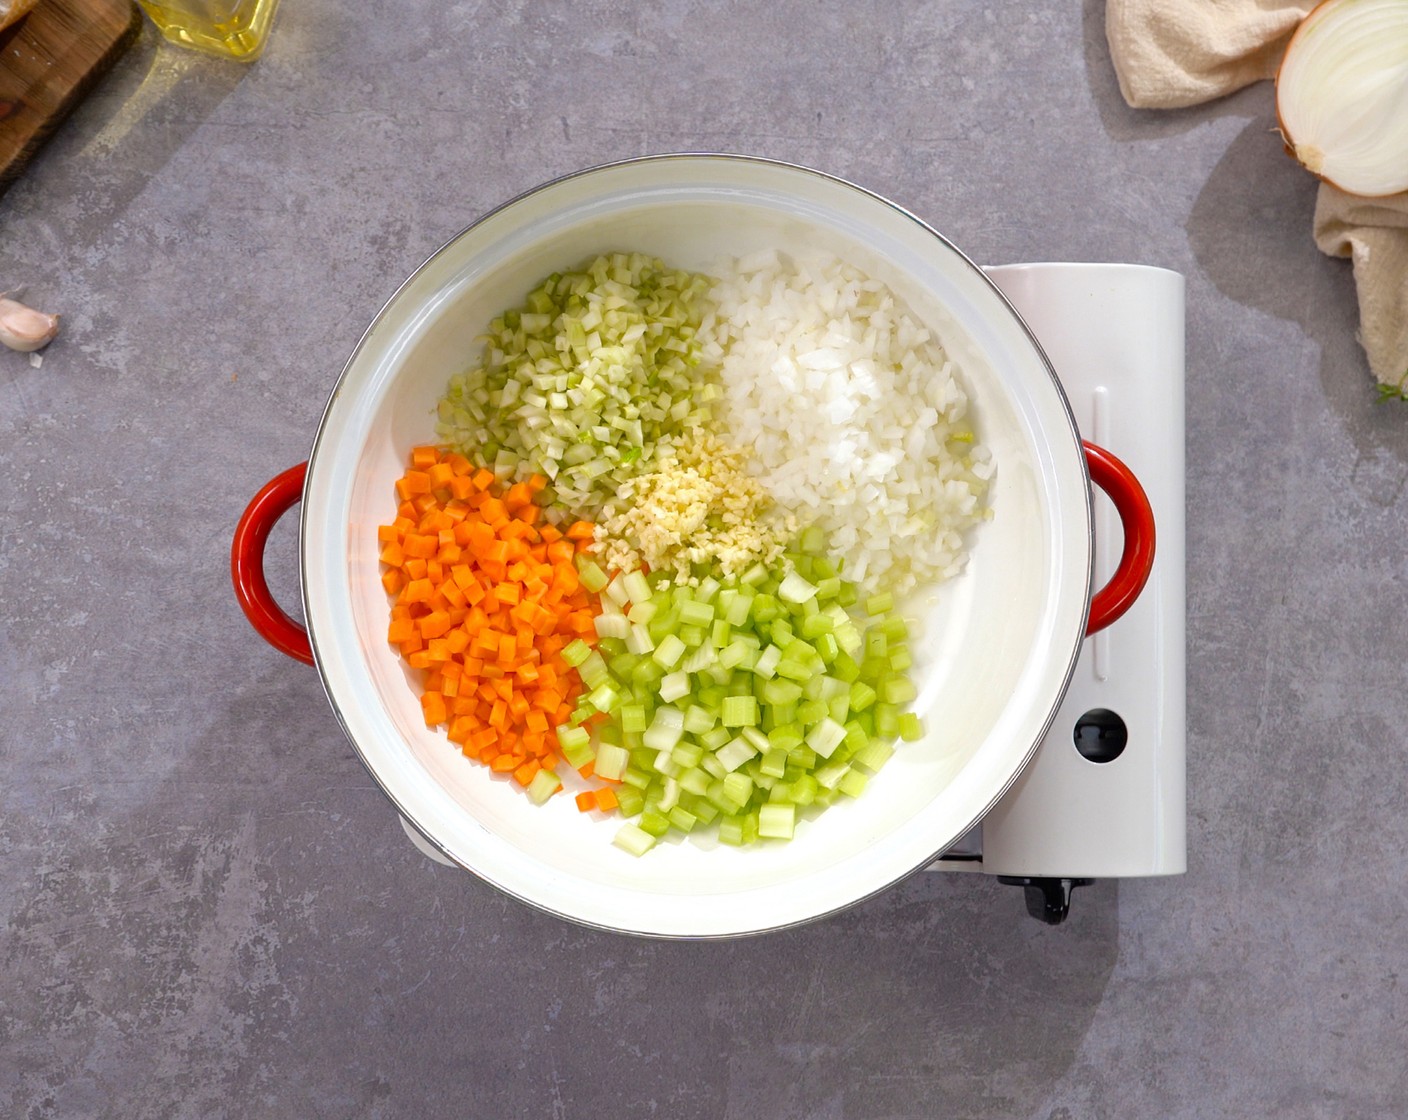 step 2 In a large pot, heat the Olive Oil (2 Tbsp) over medium heat. Add Yellow Onion (1), Fennel Bulb (1), Carrot (1/2), Celery (1 stalk), and Garlic (4 cloves). Sauté until the vegetables are soft, about 3 minutes.